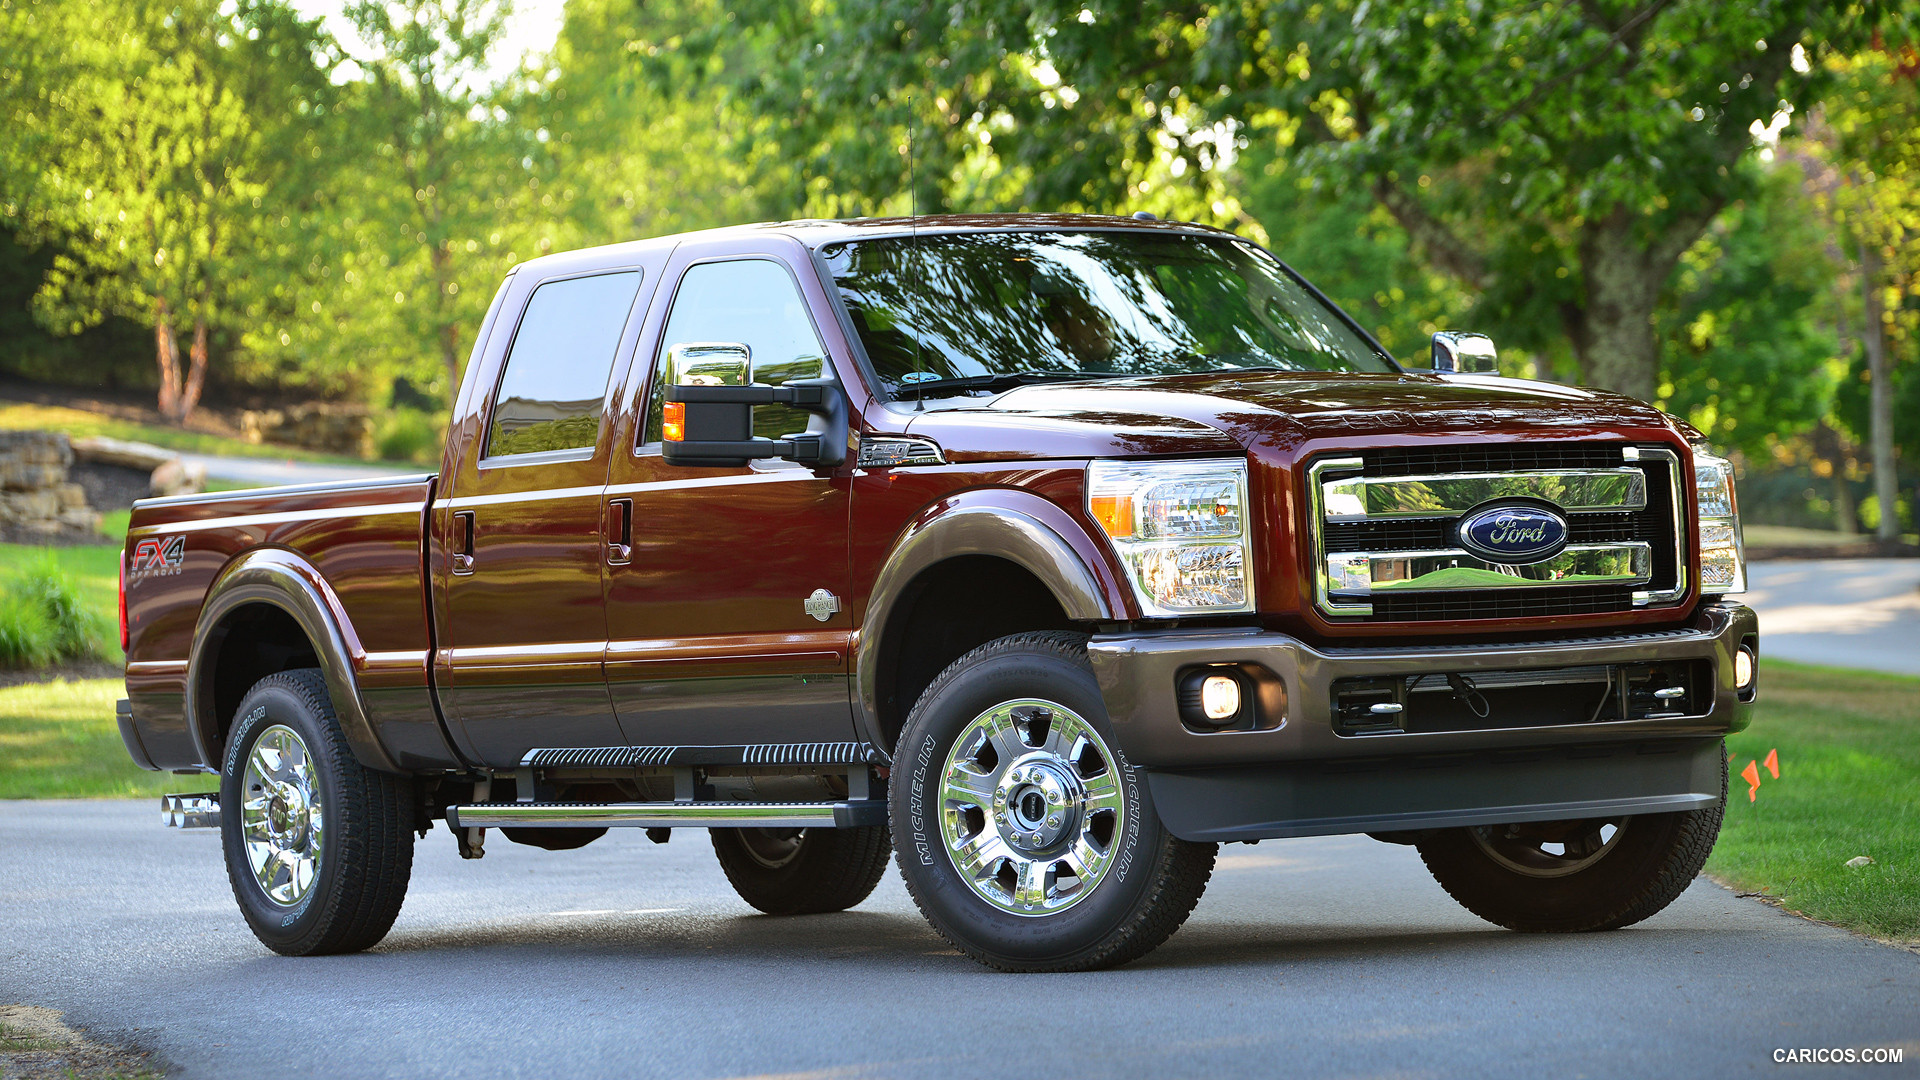 HQ 2015 Ford F-Series Super Duty Wallpapers | File 824.86Kb